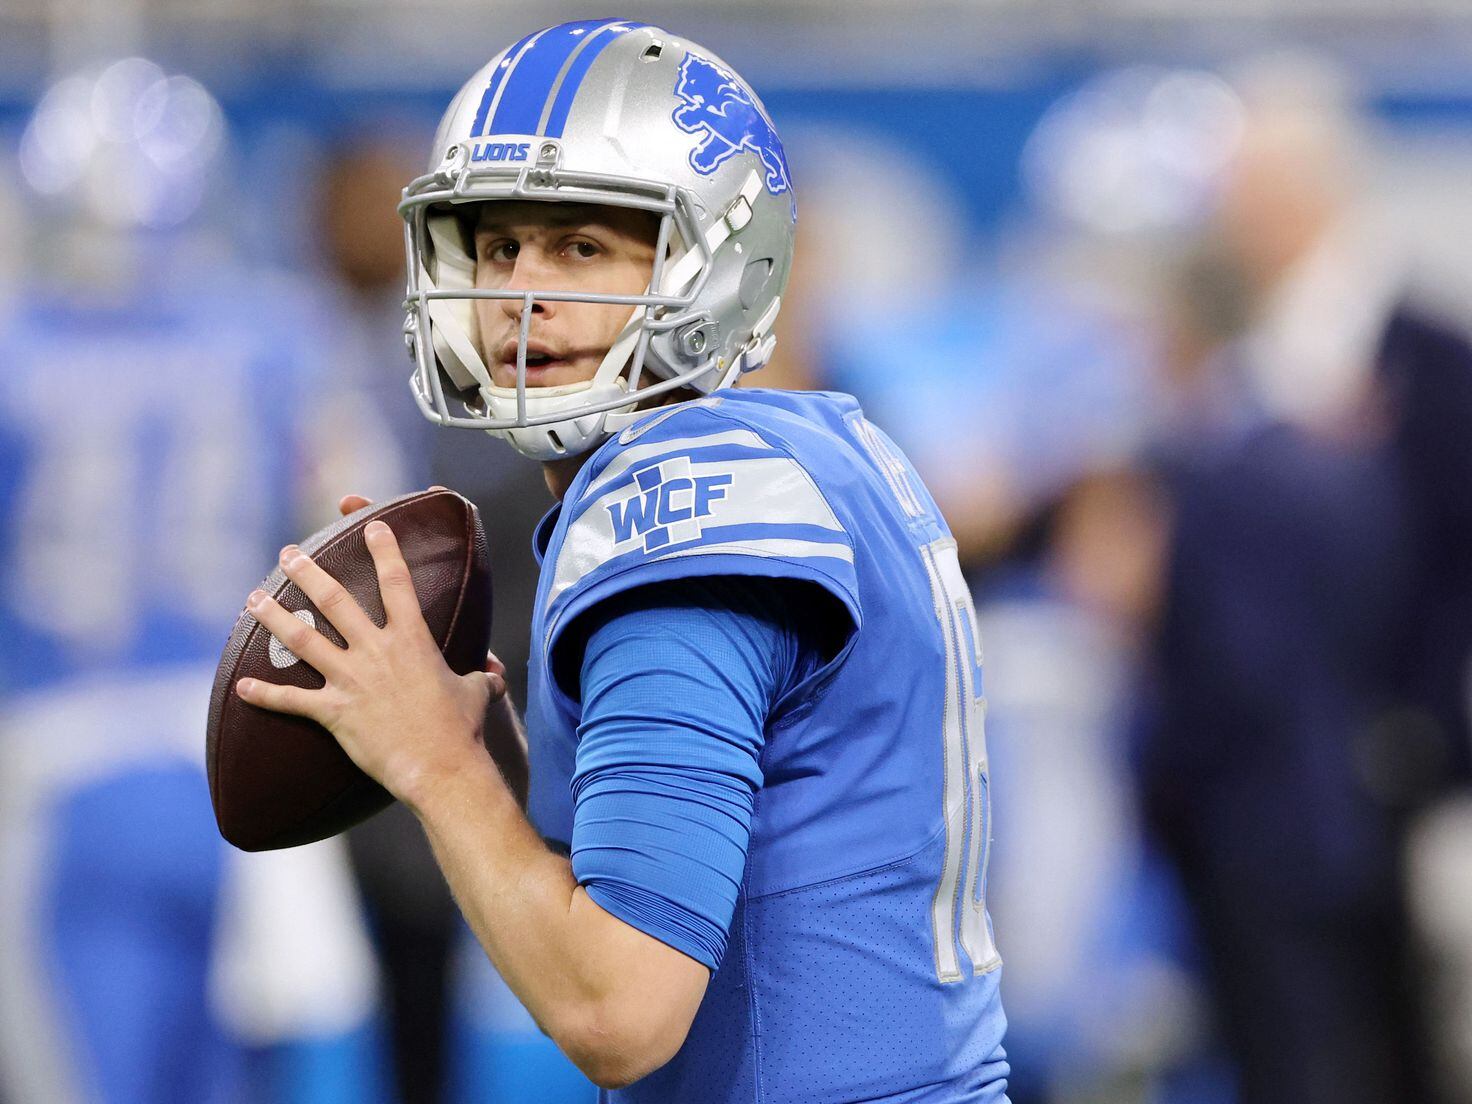 WCF' on Detroit Lions jersey: What does it stand for?